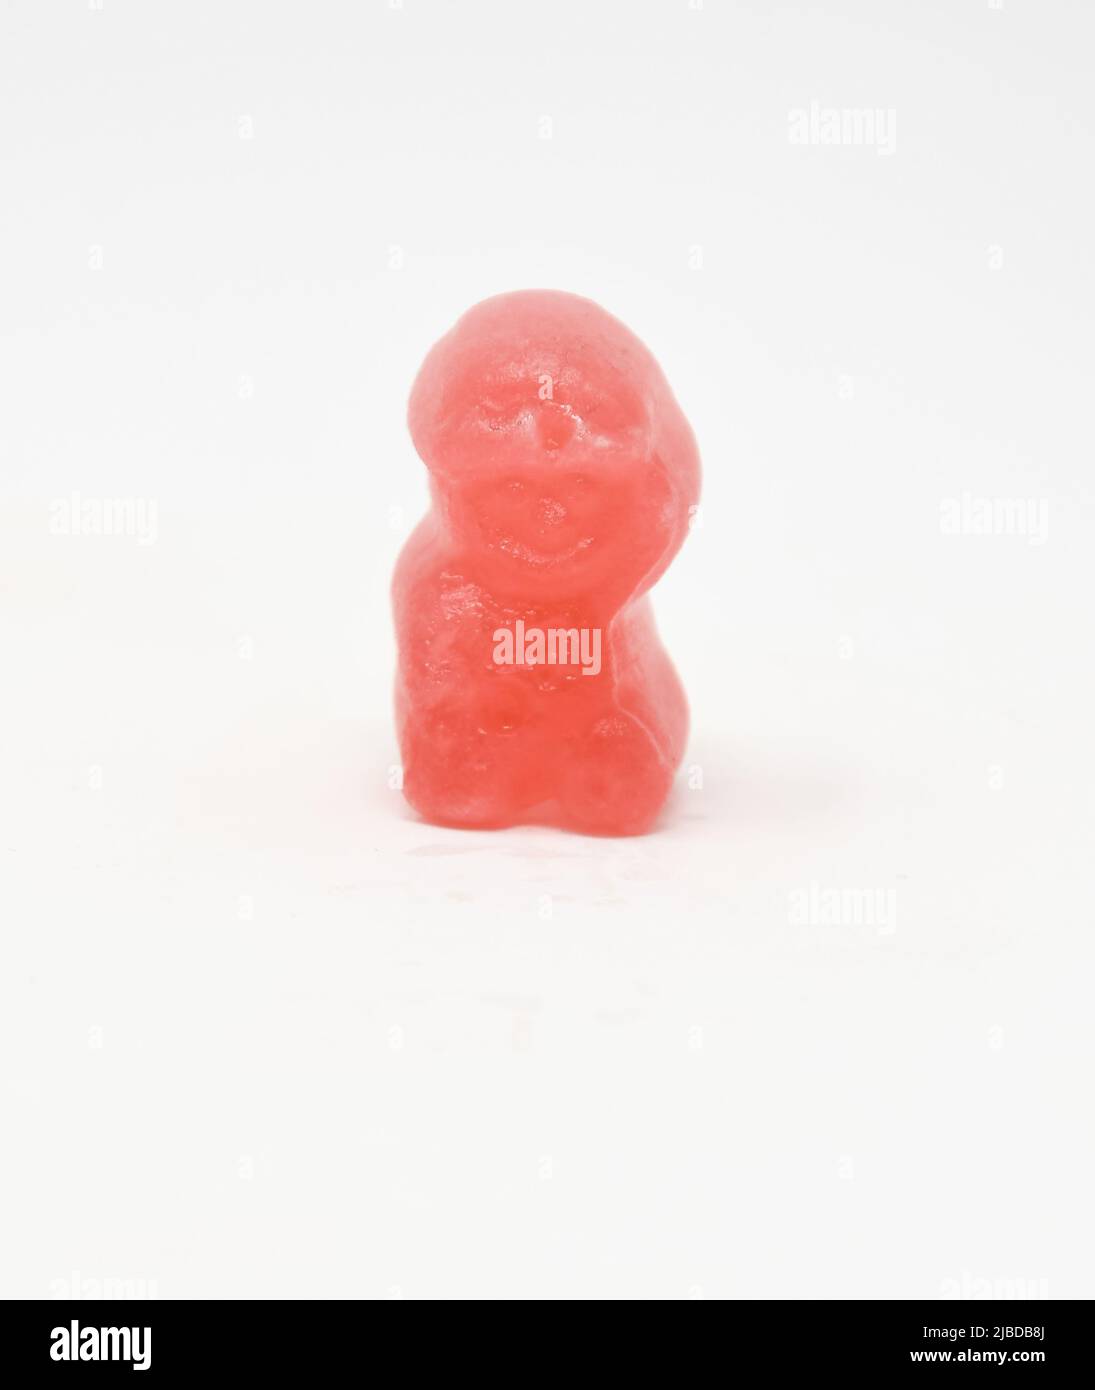 A close up photo of a Red Jelly baby Stock Photo